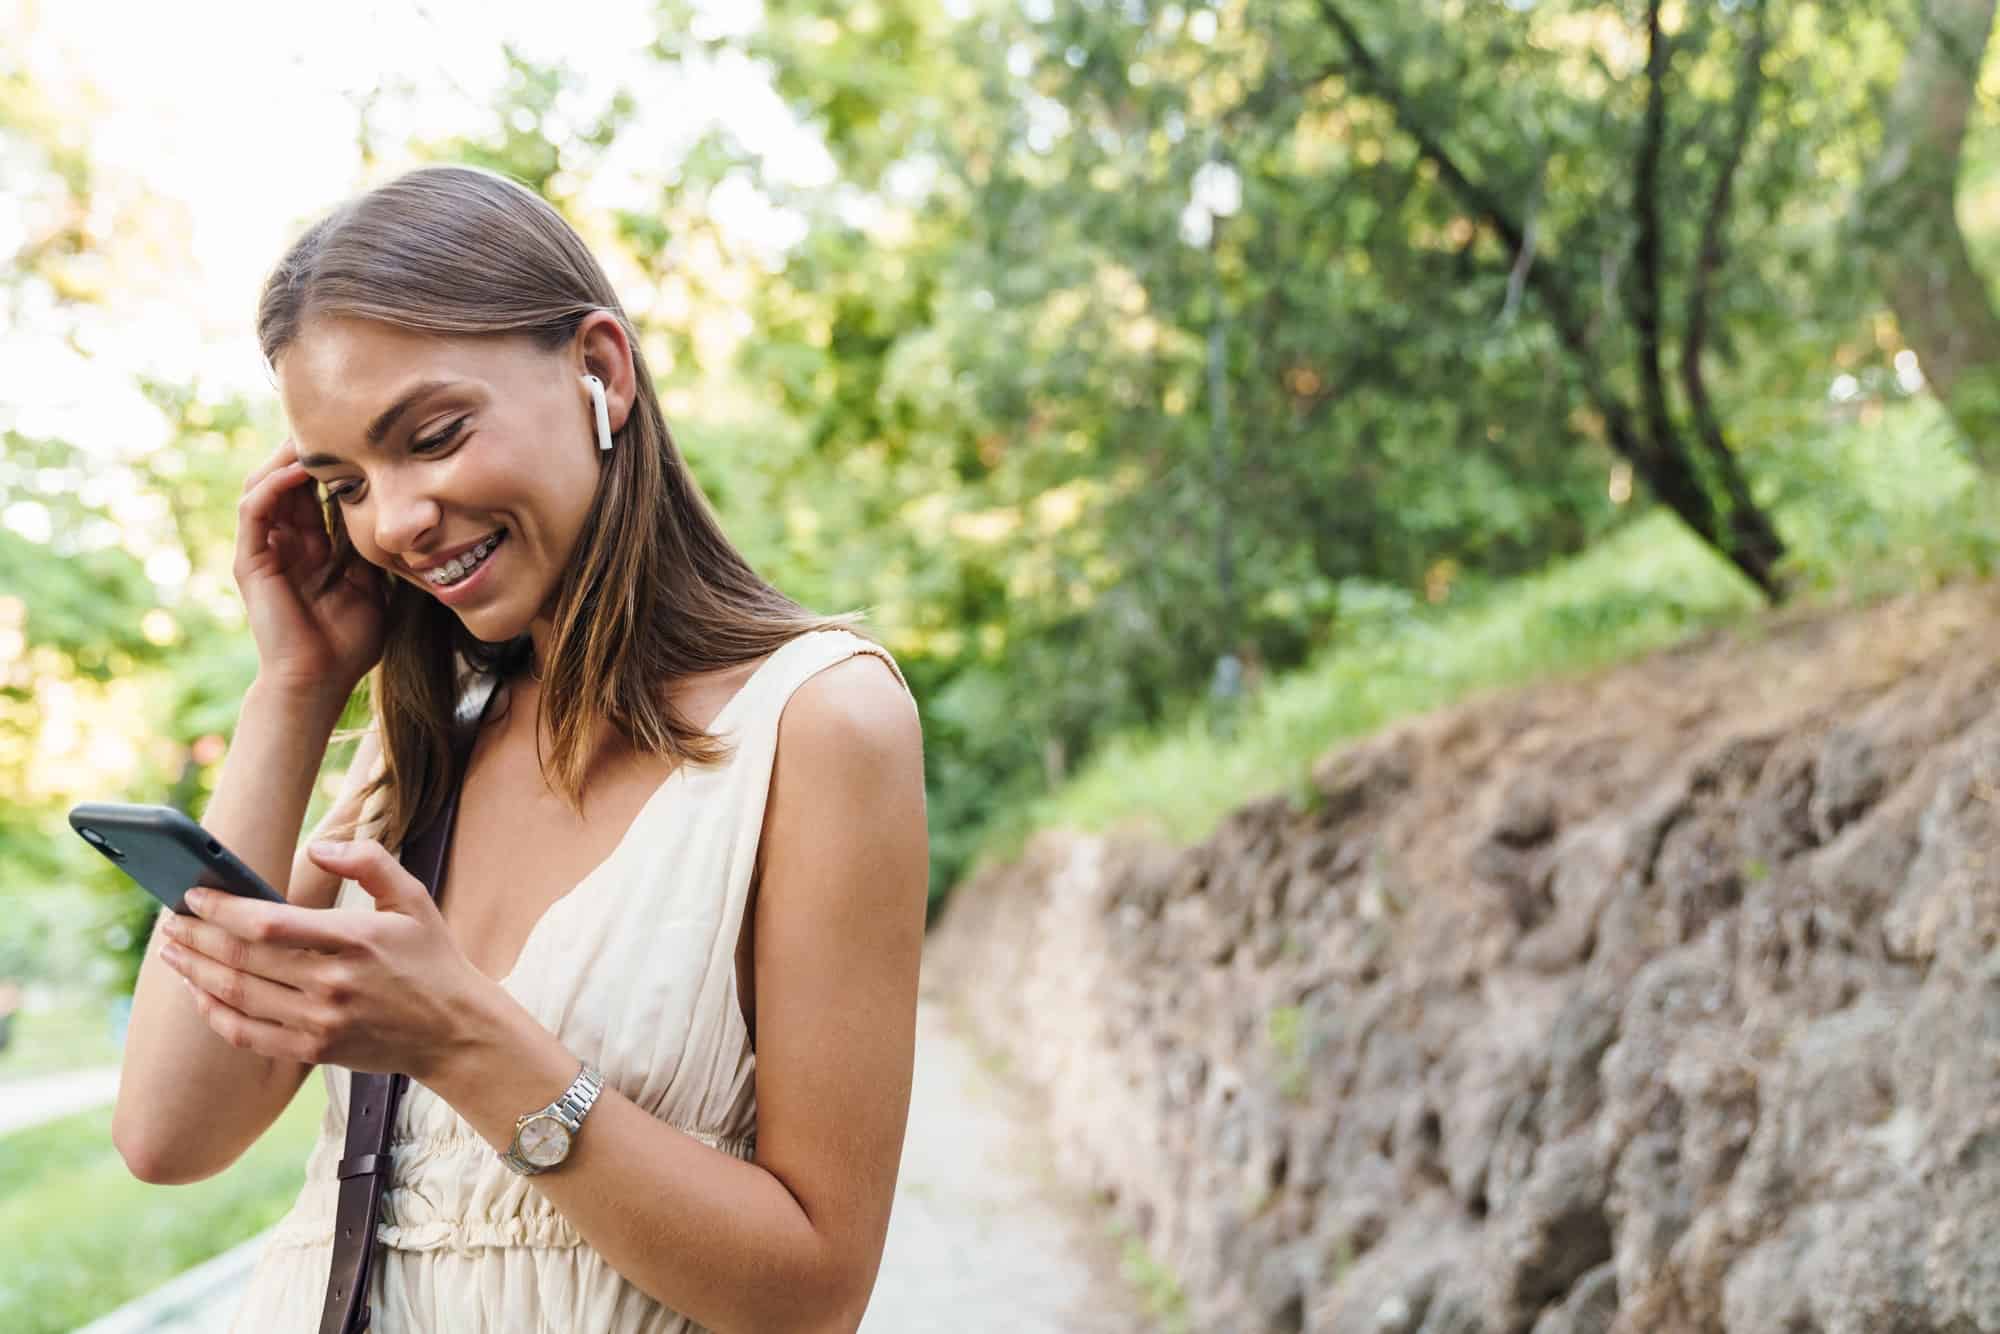 Image of young woman in earbuds laughing and holding cellphone in park